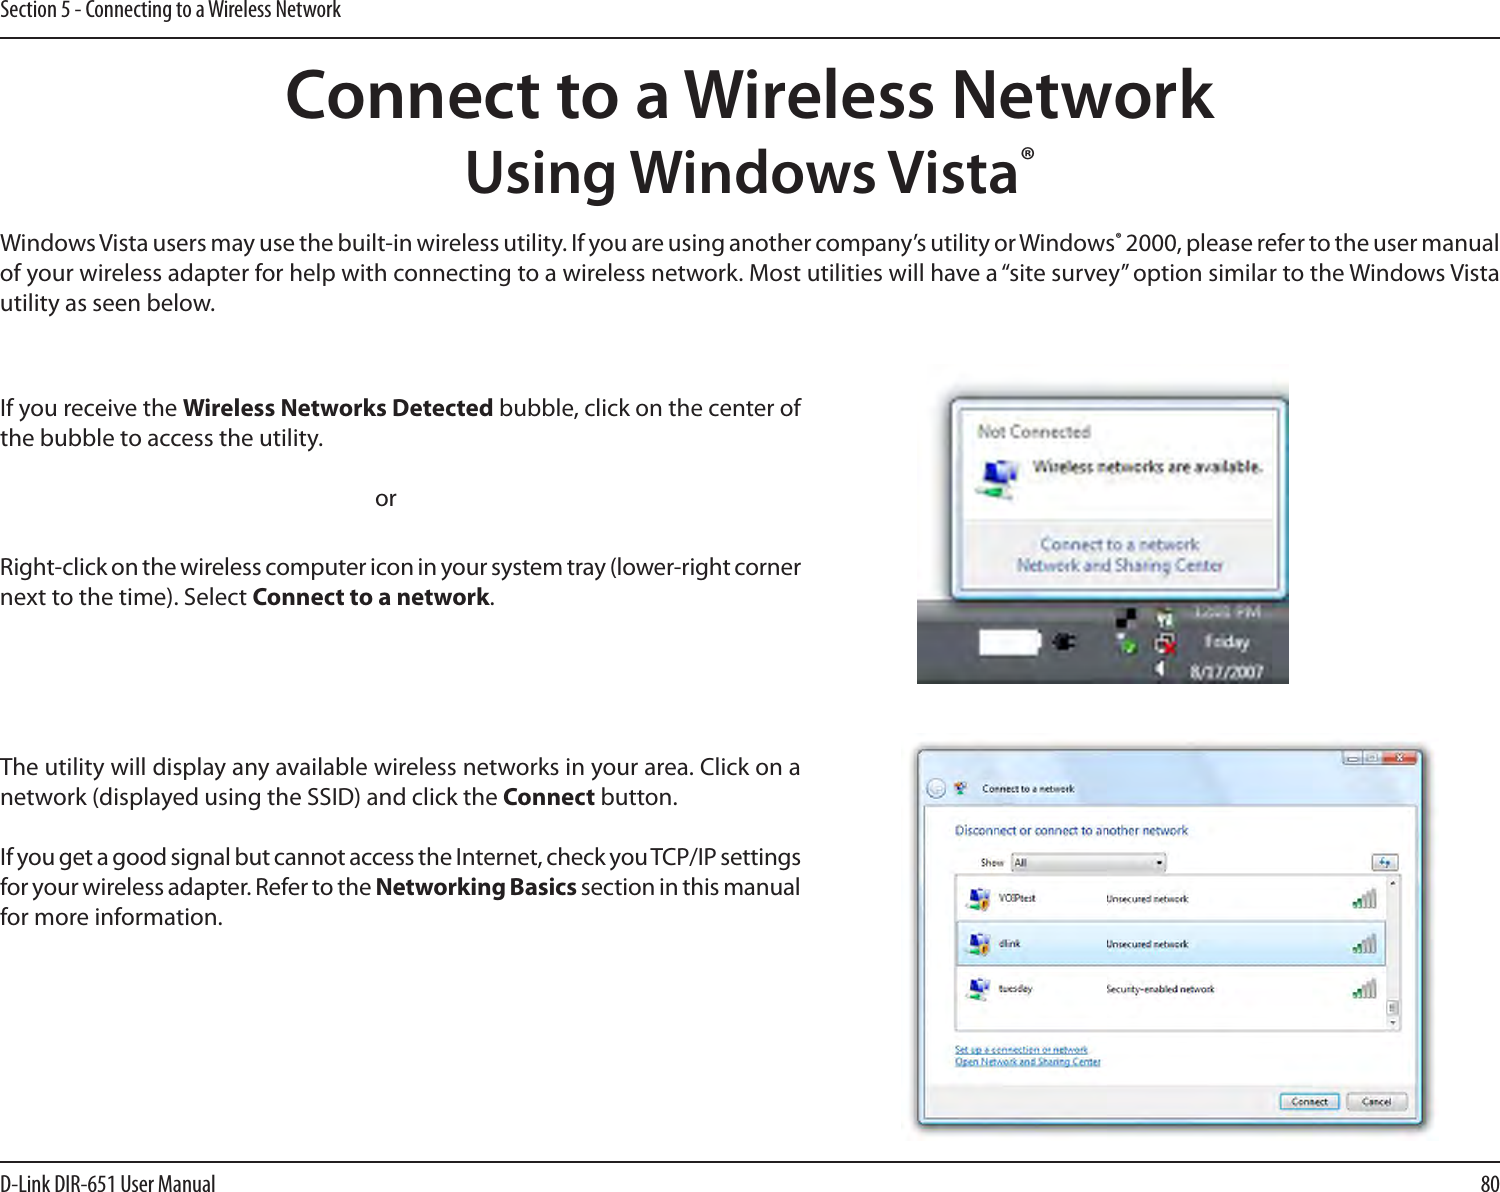 80D-Link DIR-651 User ManualSection 5 - Connecting to a Wireless NetworkConnect to a Wireless NetworkUsing Windows Vista®Windows Vista users may use the built-in wireless utility. If you are using another company’s utility or Windows® 2000, please refer to the user manual of your wireless adapter for help with connecting to a wireless network. Most utilities will have a “site survey” option similar to the Windows Vista utility as seen below.Right-click on the wireless computer icon in your system tray (lower-right corner next to the time). Select Connect to a network.If you receive the Wireless Networks Detected bubble, click on the center of the bubble to access the utility.     orThe utility will display any available wireless networks in your area. Click on a network (displayed using the SSID) and click the Connect button.If you get a good signal but cannot access the Internet, check you TCP/IP settings for your wireless adapter. Refer to the Networking Basics section in this manual for more information.